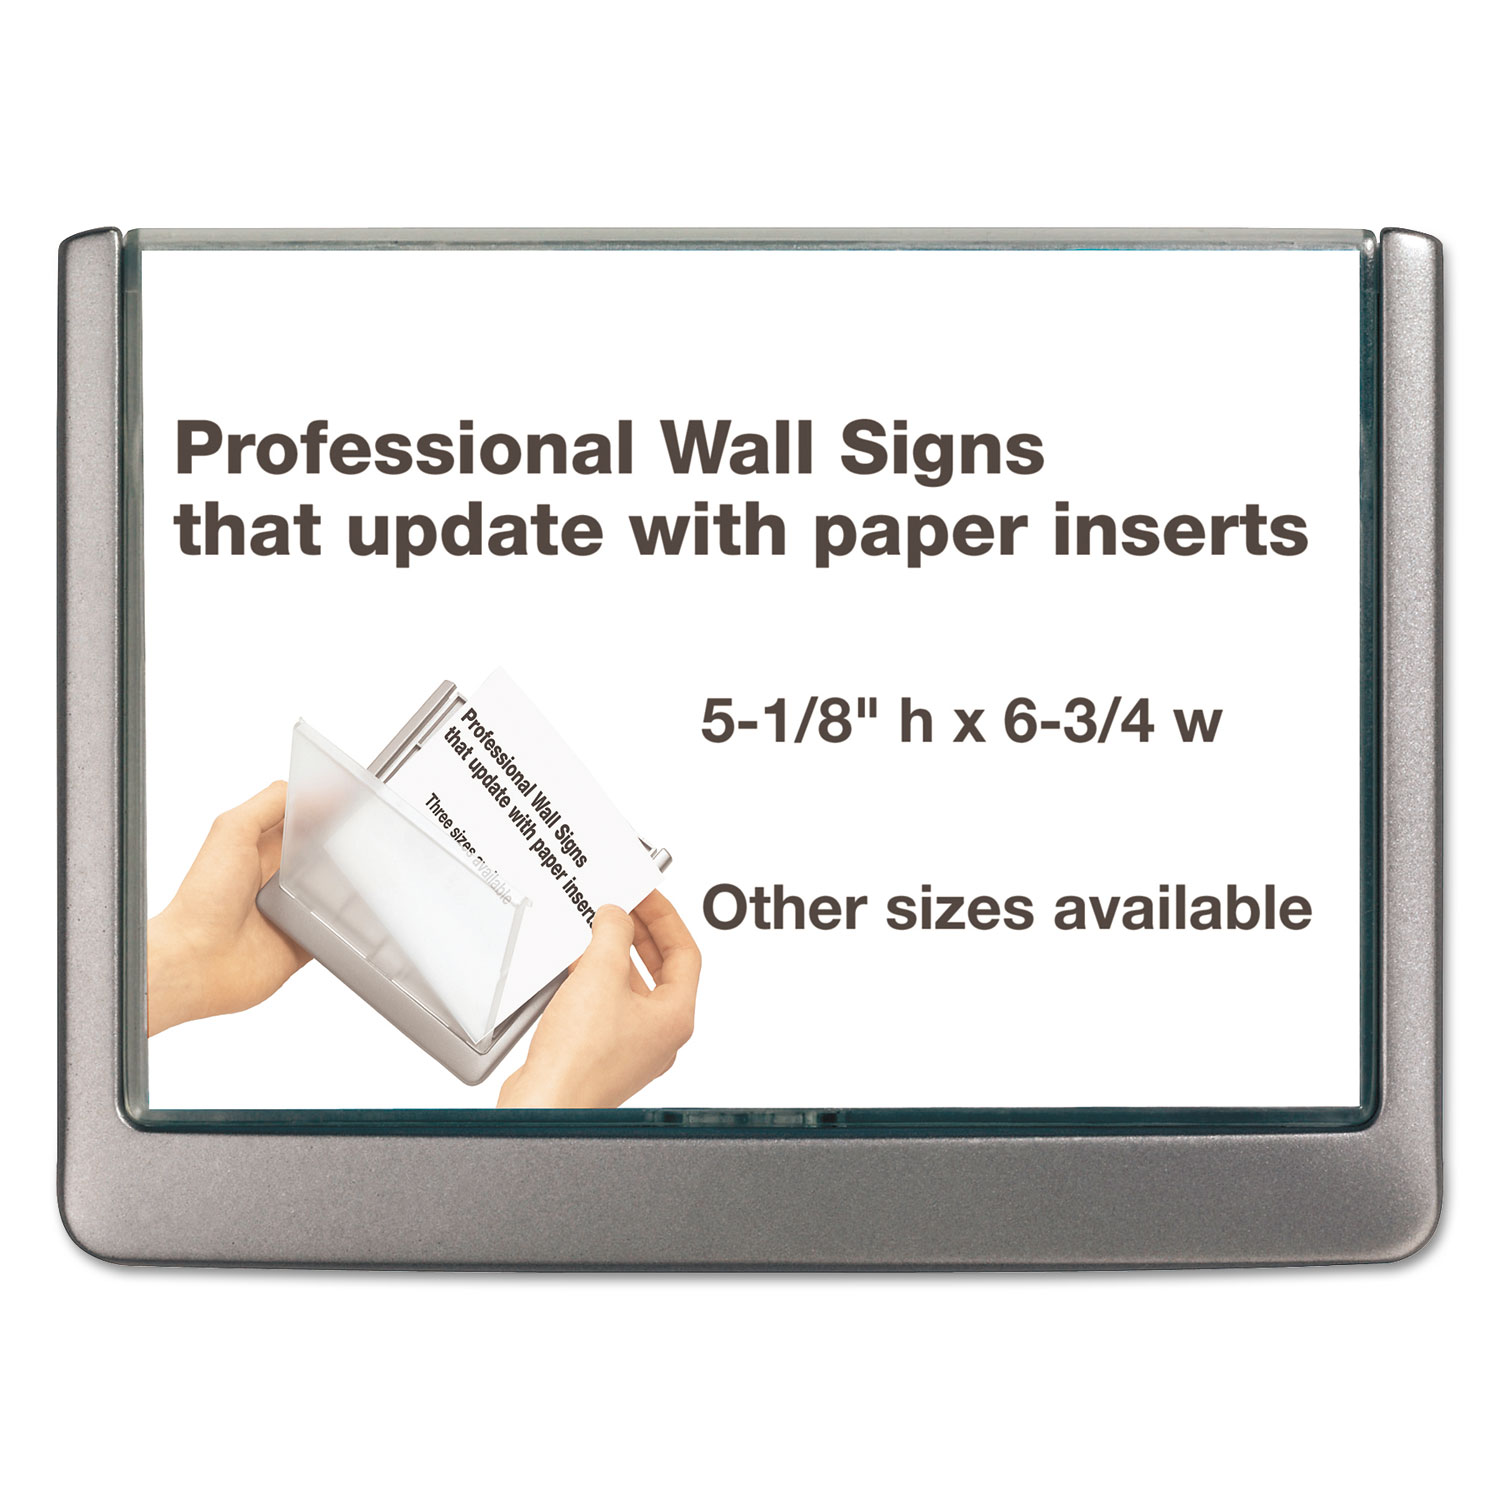  Durable 497737 Click Sign Holder For Interior Walls, 6 3/4 x 5/8 x 5 1/8, Gray (DBL497737) 